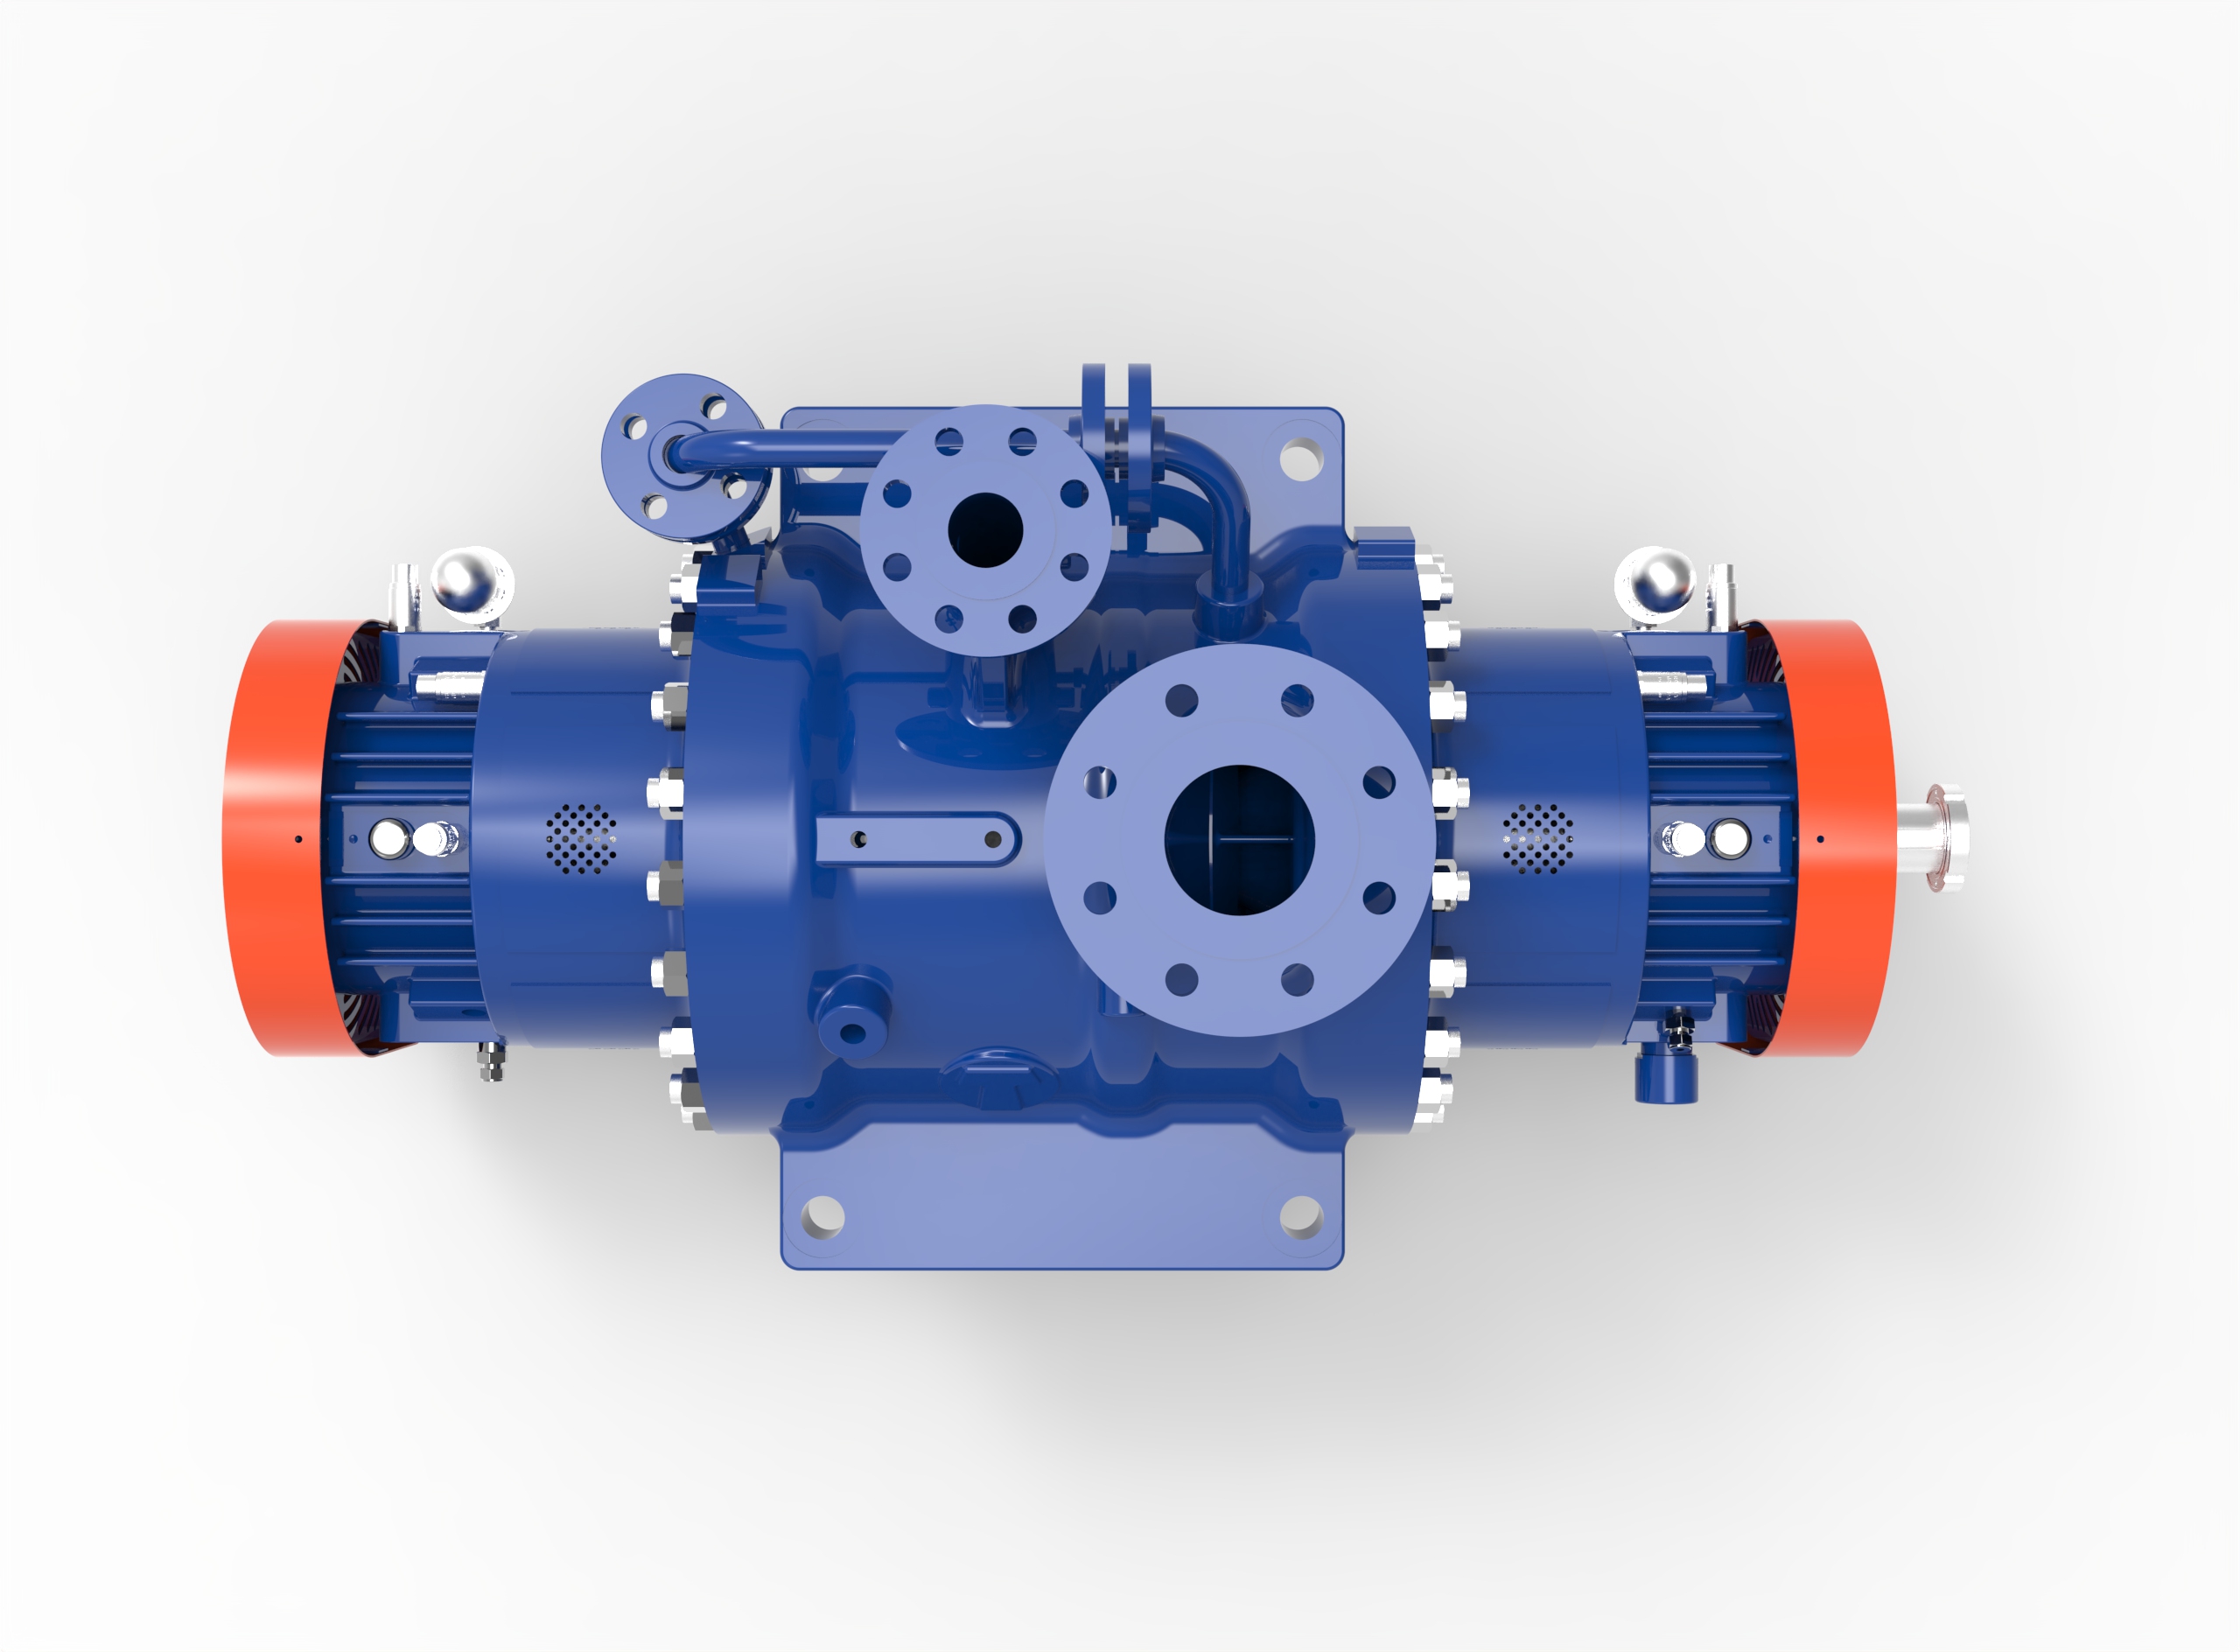 Top view of a Termomeccanica Pompe A2P 610 Centrifugal Pump manufactured by Trillium Flow Technologies